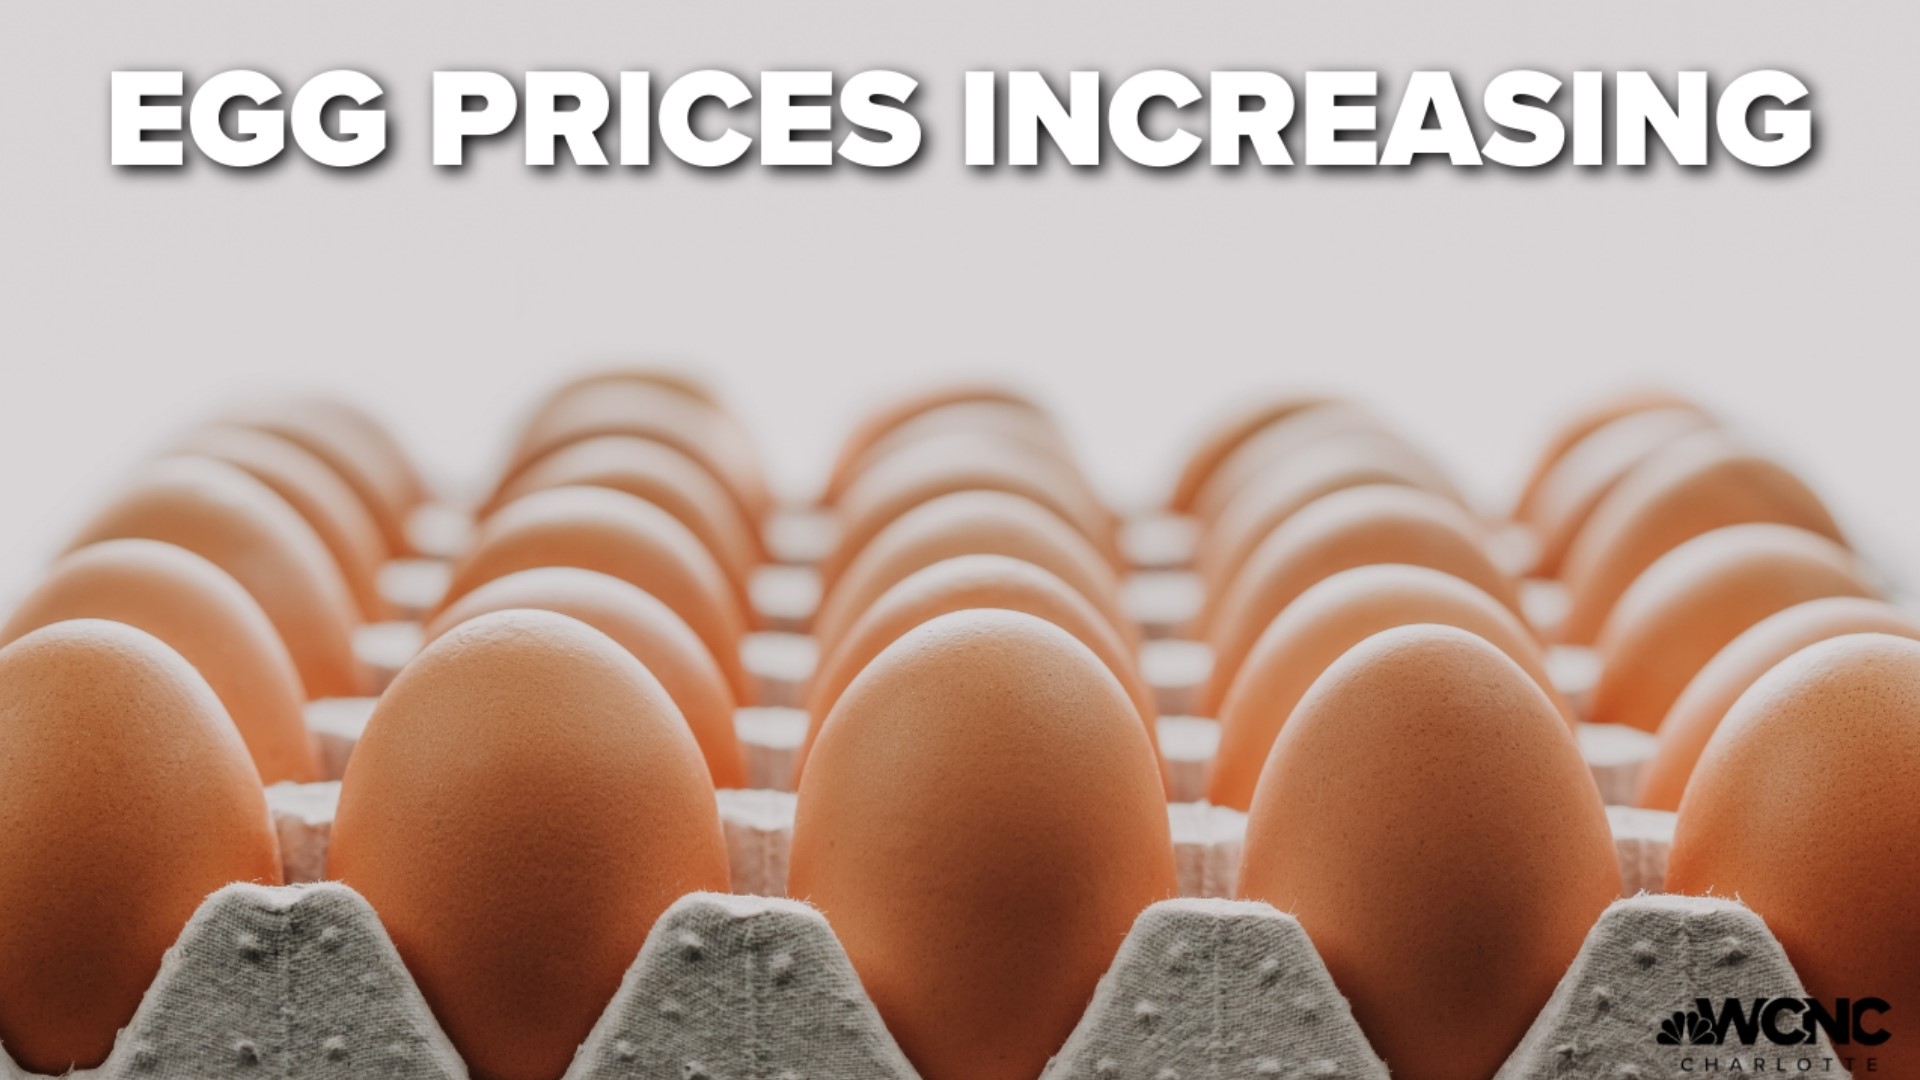 Eggs are a major part of the American diet, and more than any other grocery item, they have skyrocket in price.